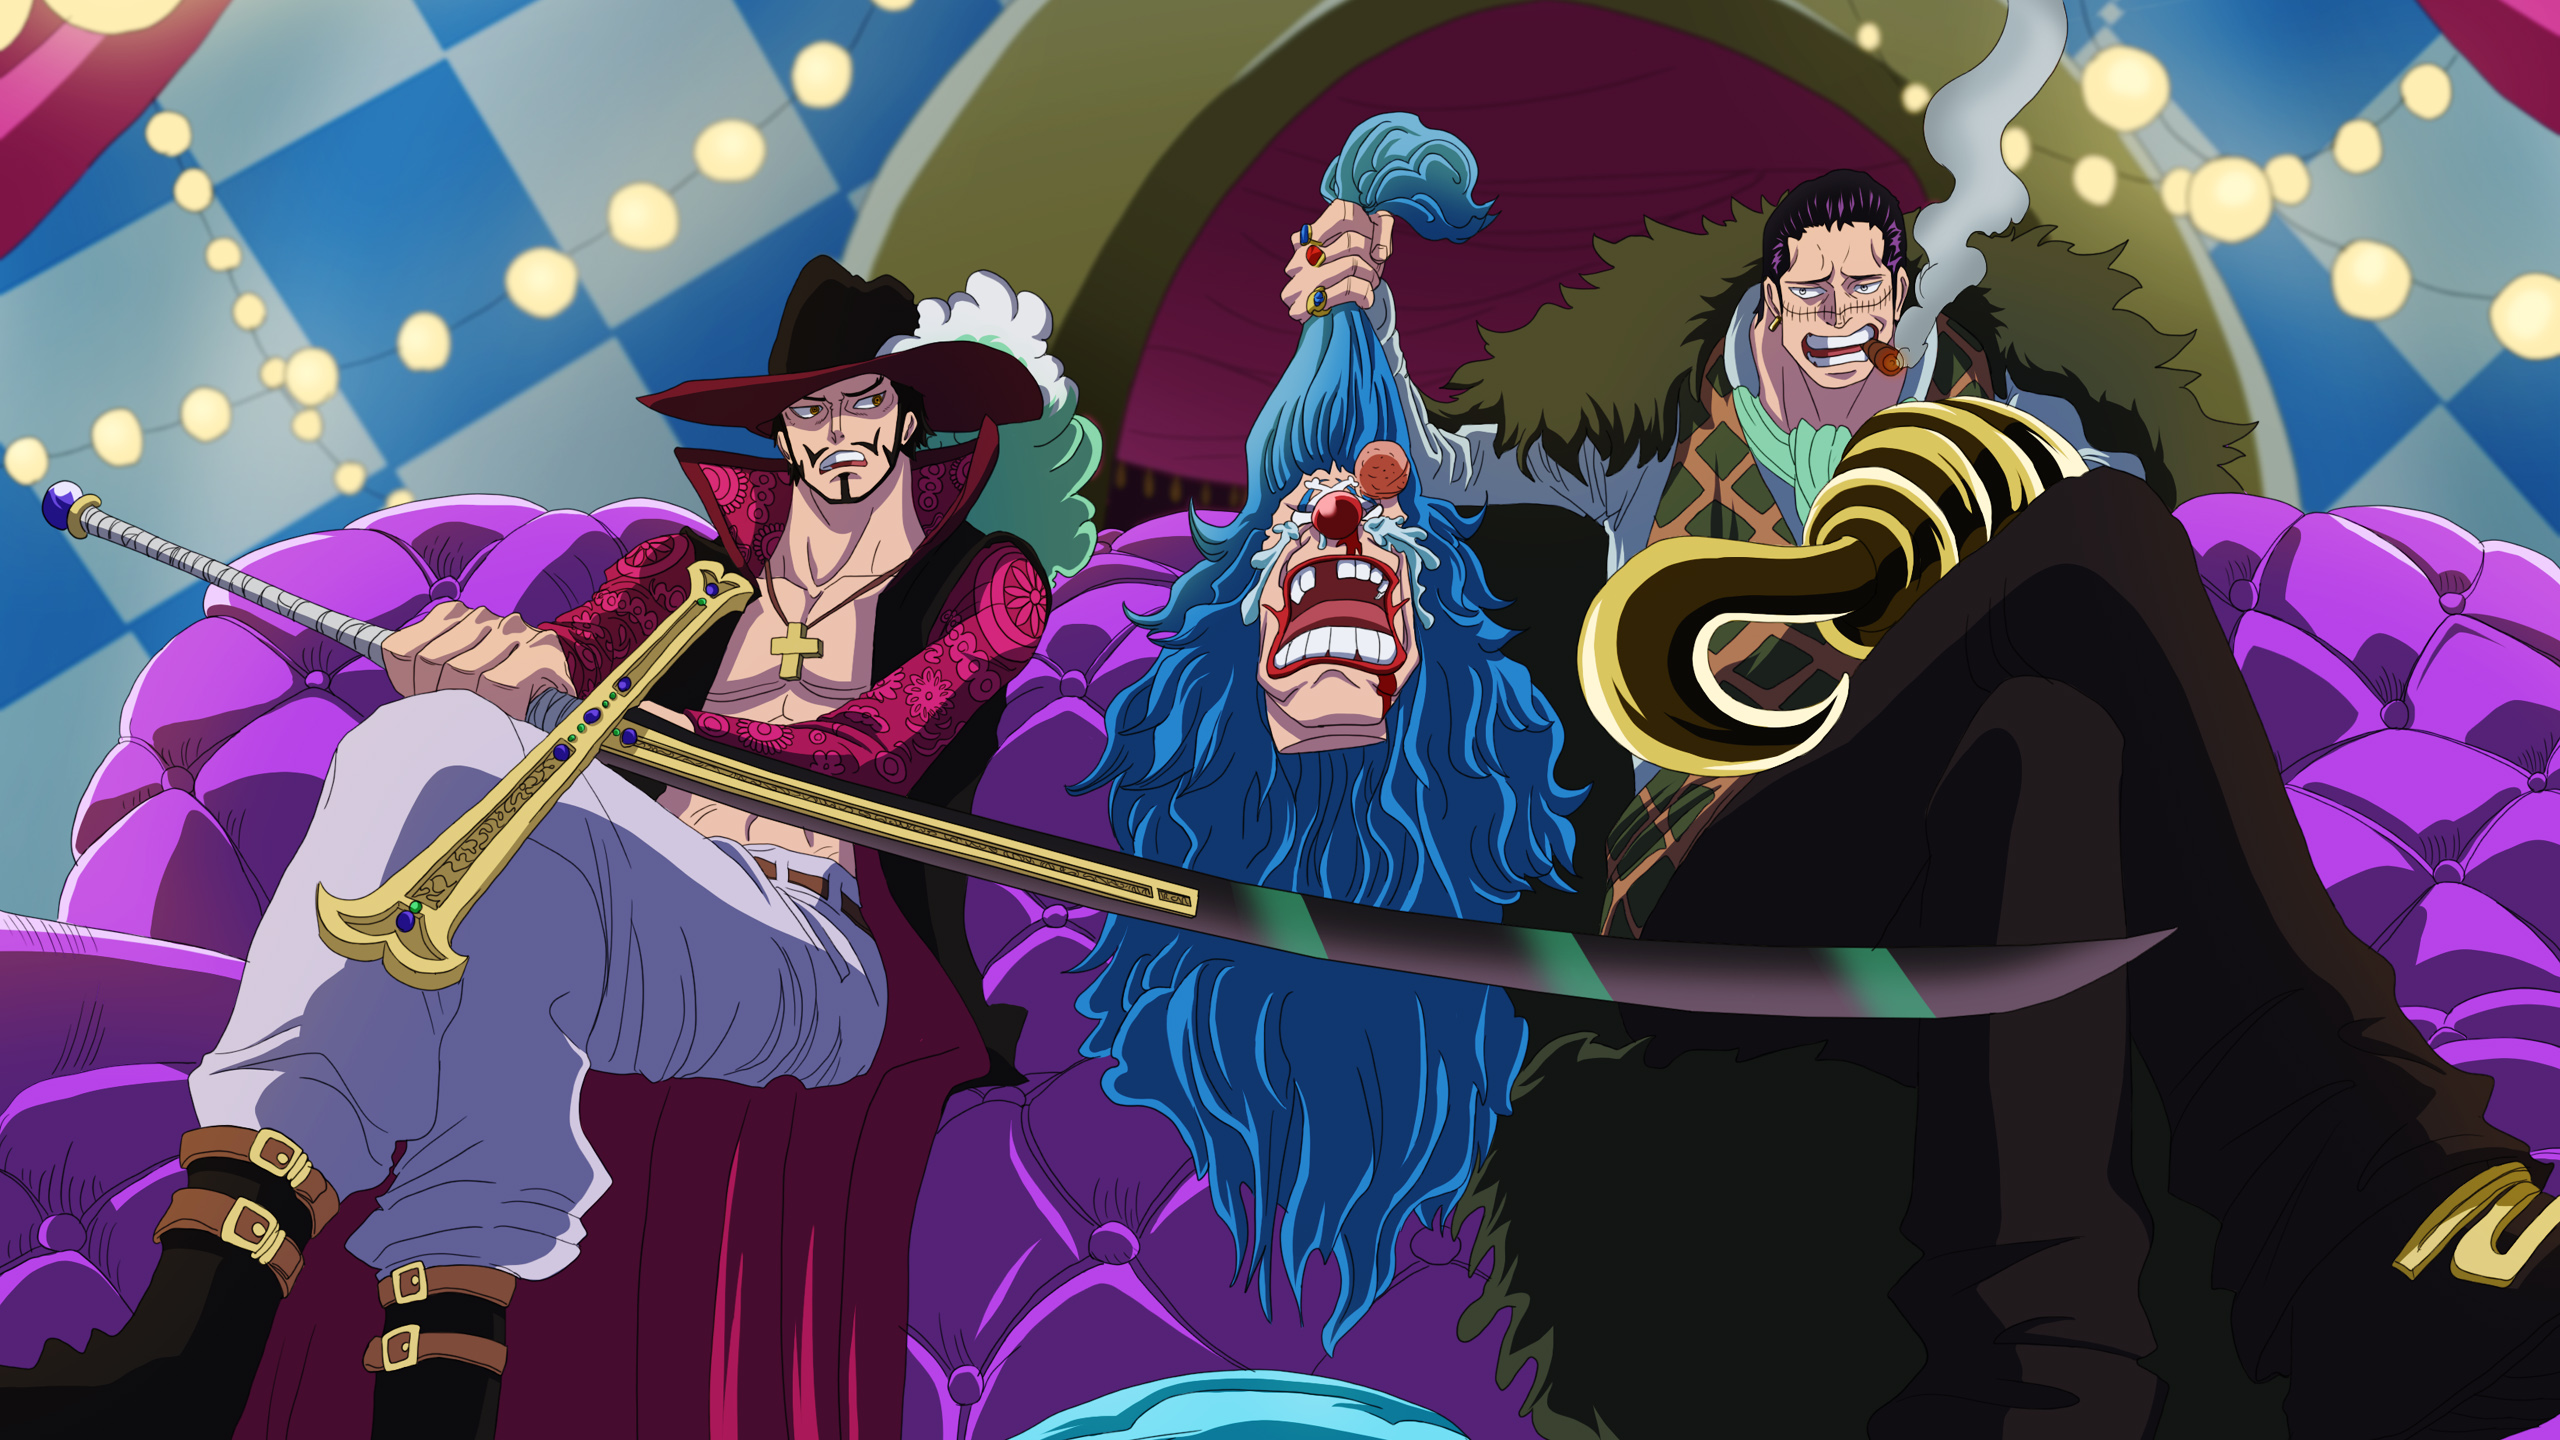 One Piece Finally Reveals the Jolly Roger of the Cross Guild